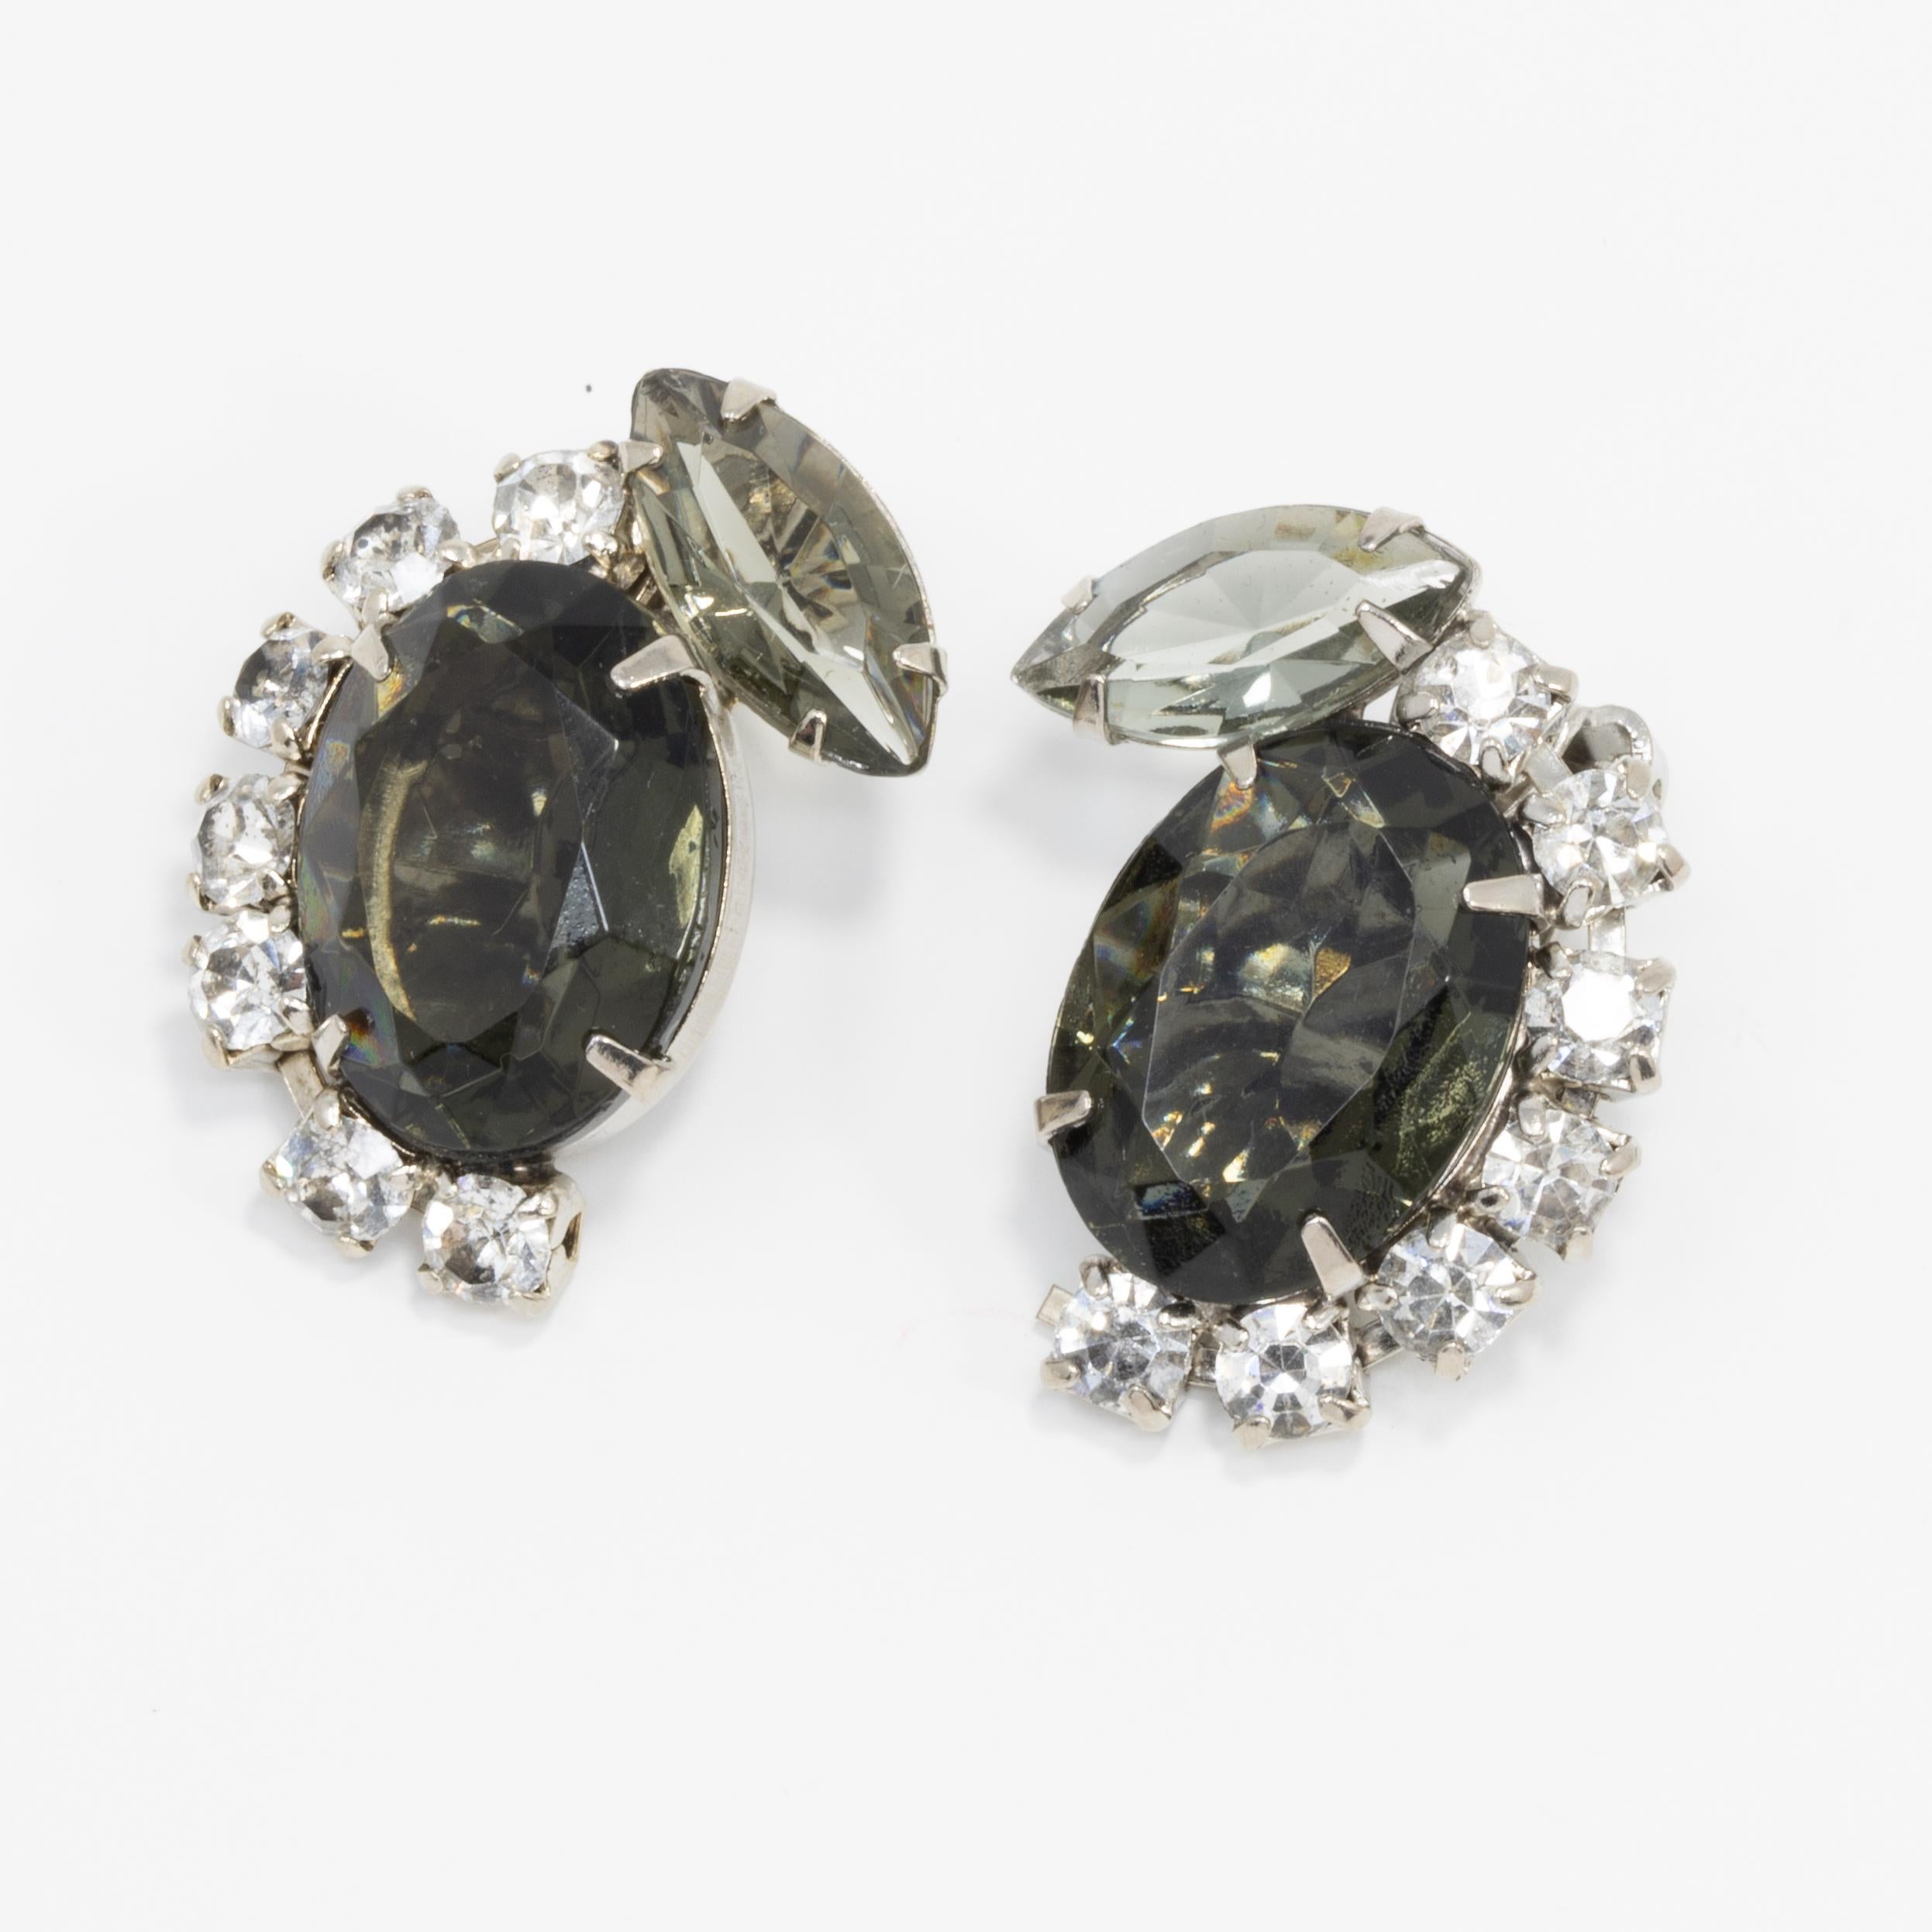 A pair of retro clip on earrings, with large, centerpiece, smoky gray crystals, accented with prong-set, clear crystals. Silvertone.

Circa mid 1900s.